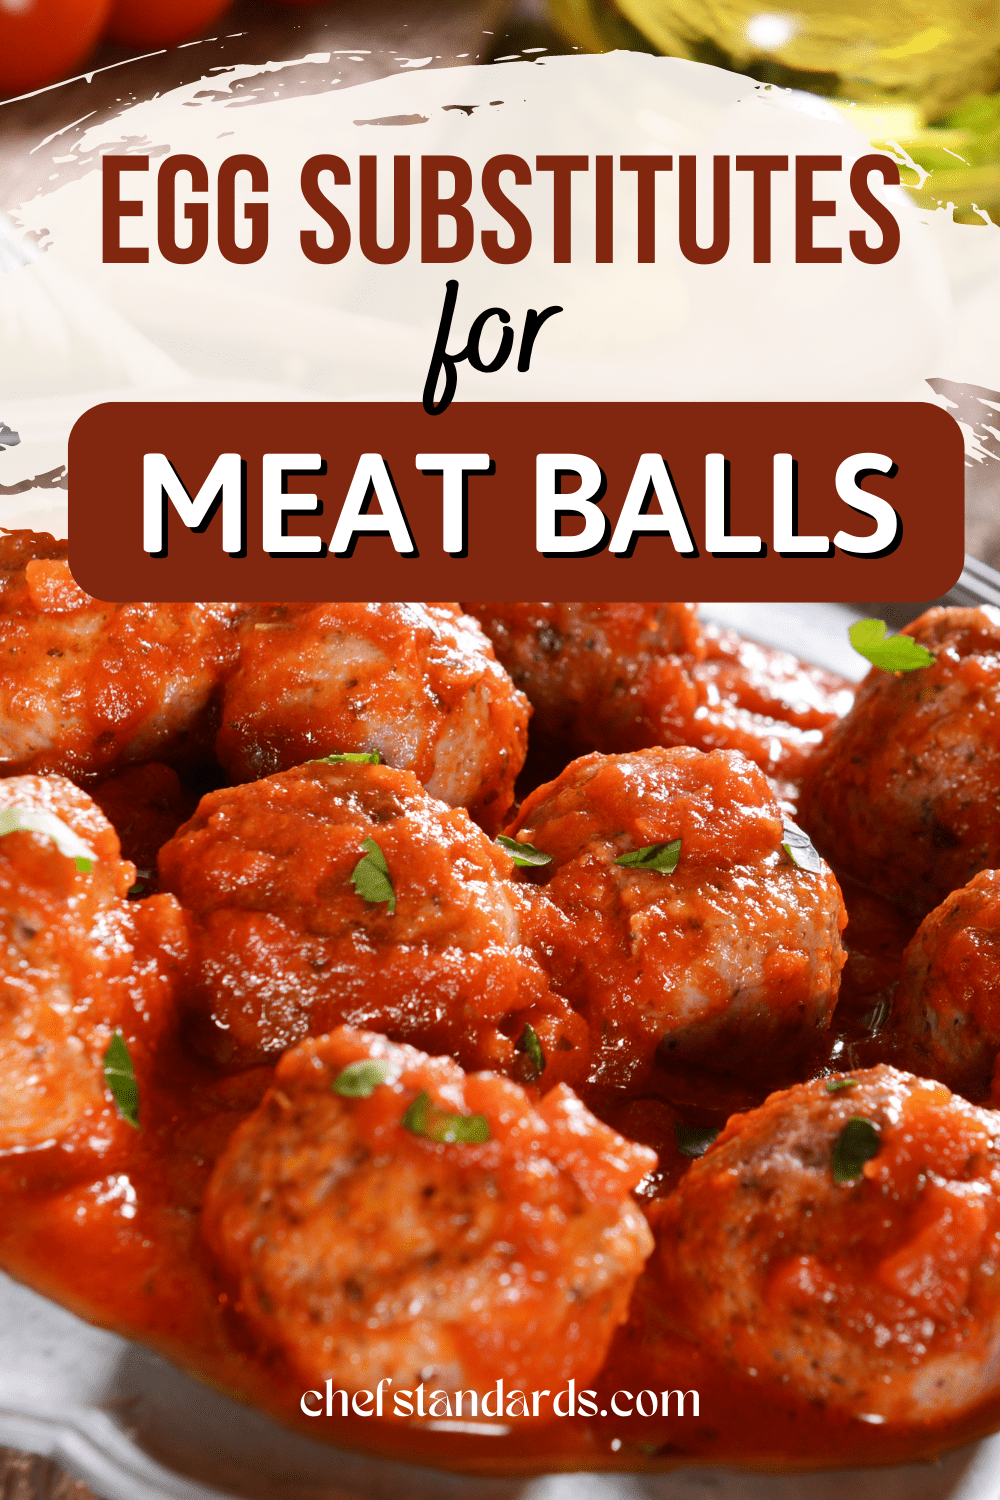 Looking For An Egg Substitute For Meatballs Here Are 18 